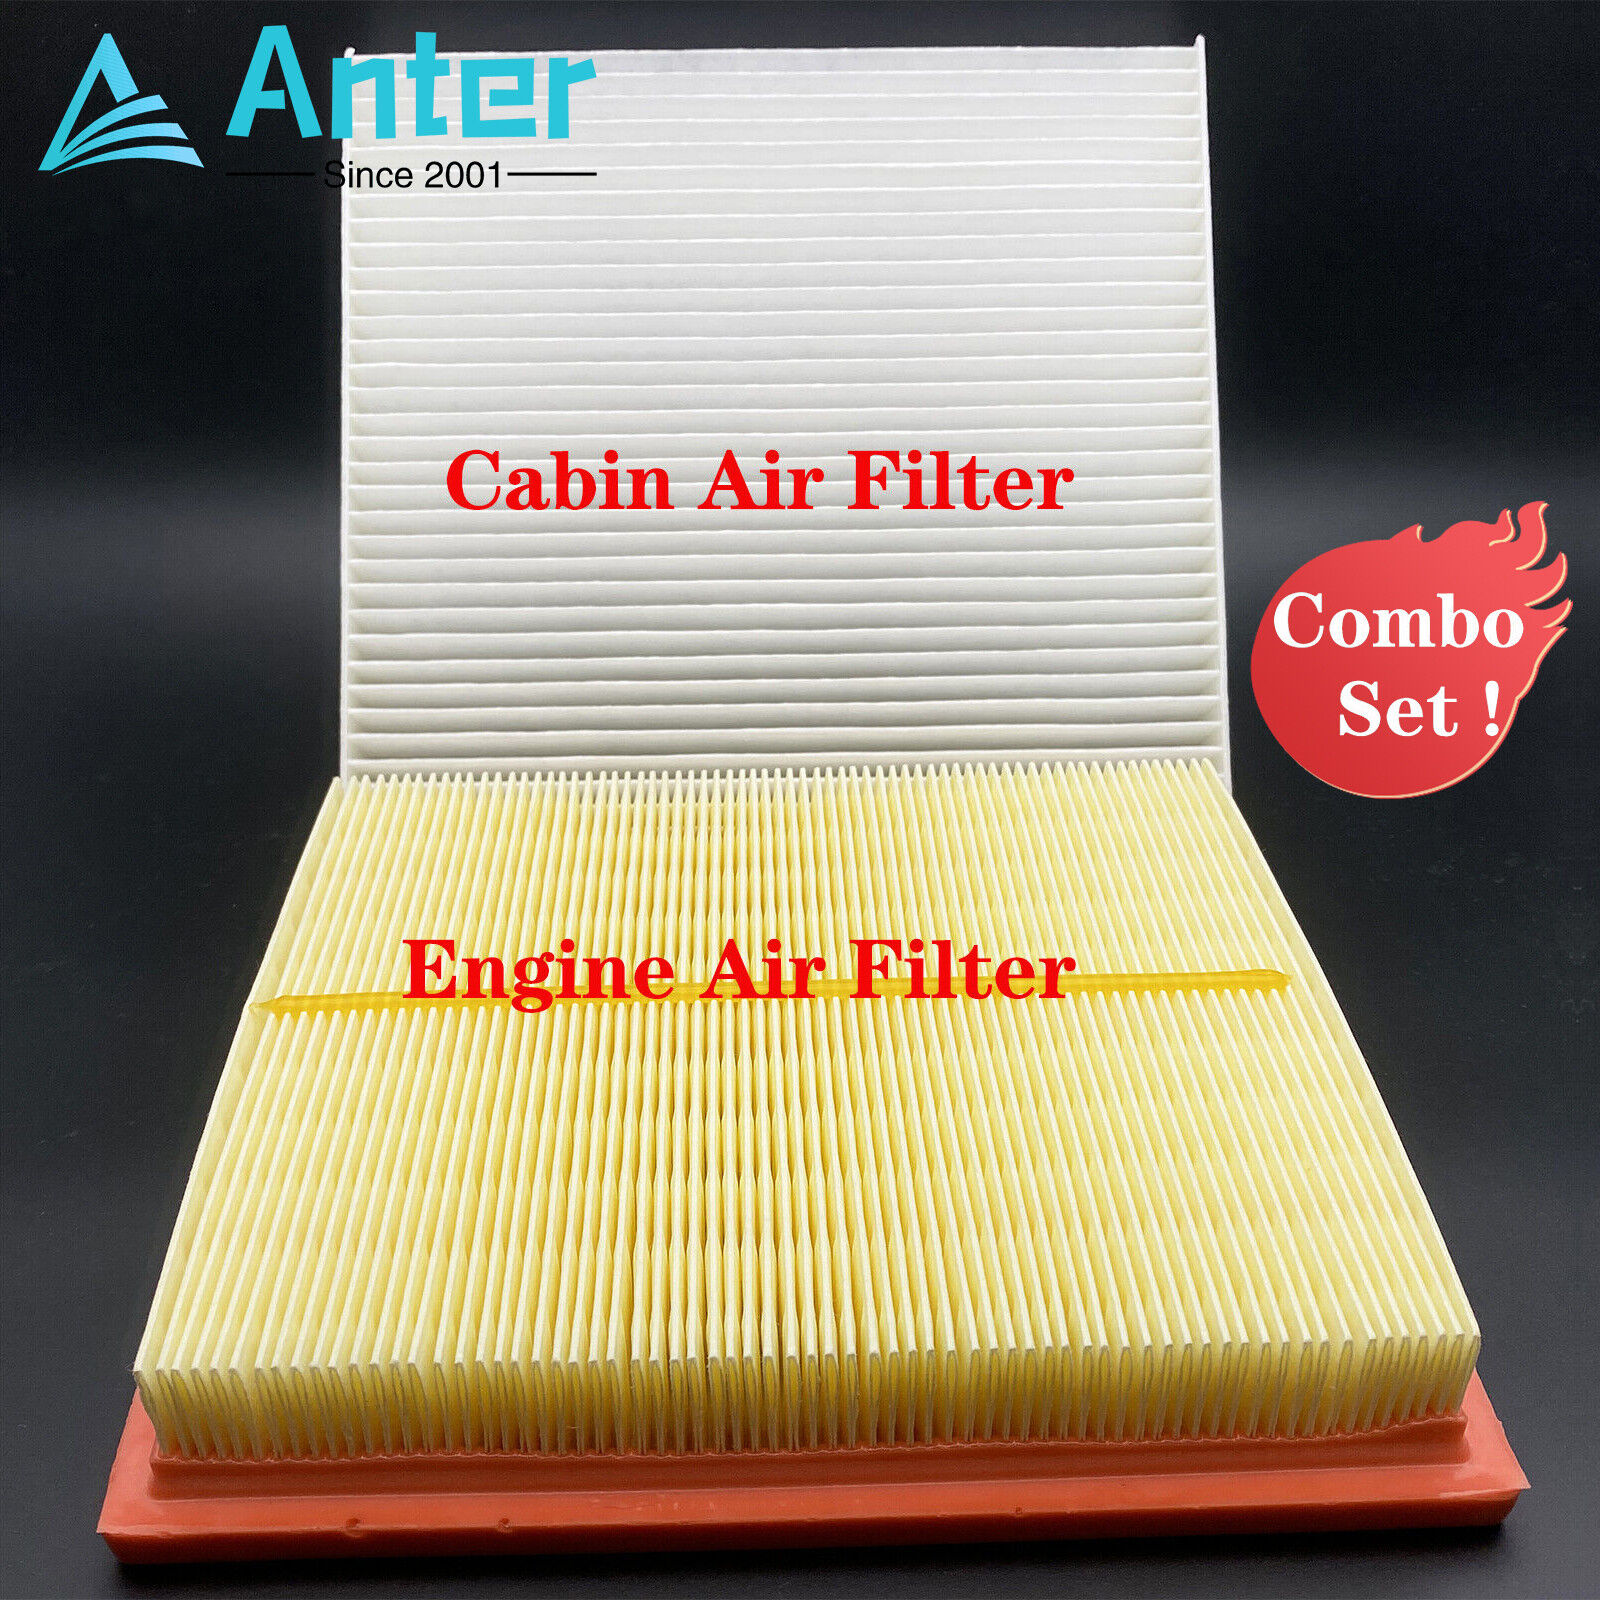 CABIN & AIR FILTER COMBO FOR TOYOTA PRIUS 1.8L ENGINE 2015 - 2010